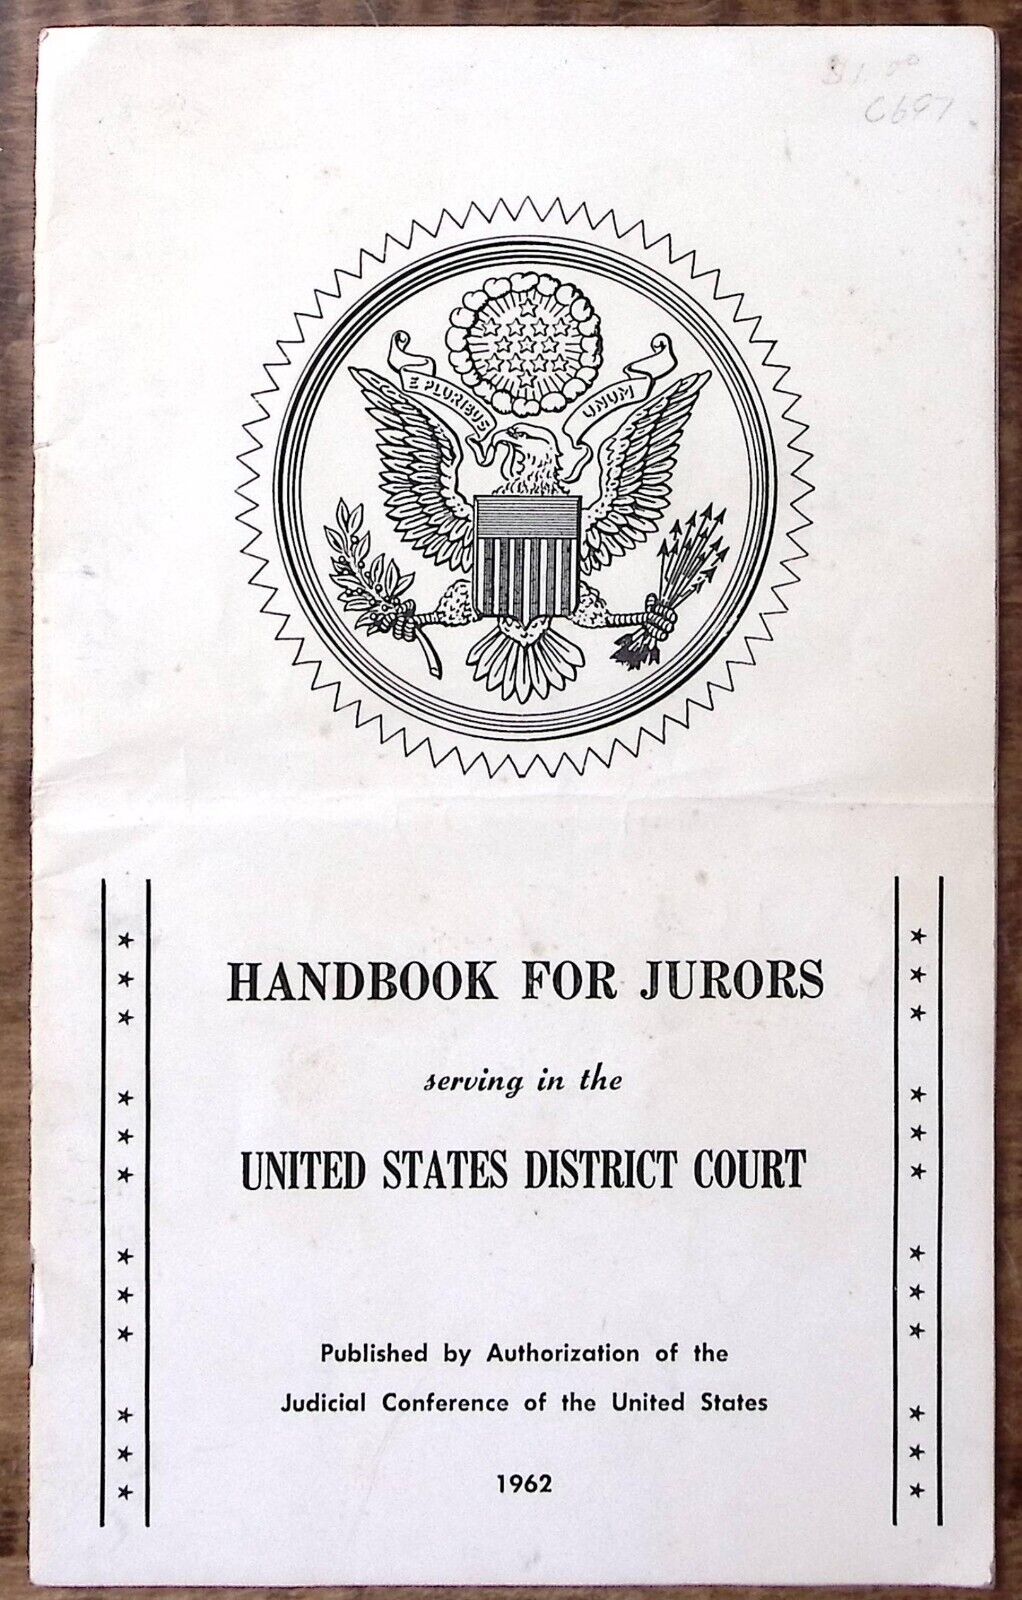 1962 HANDBOOK FOR JURORS SERVING IN THE UNITED STATES DISTRICT COURT Z5346